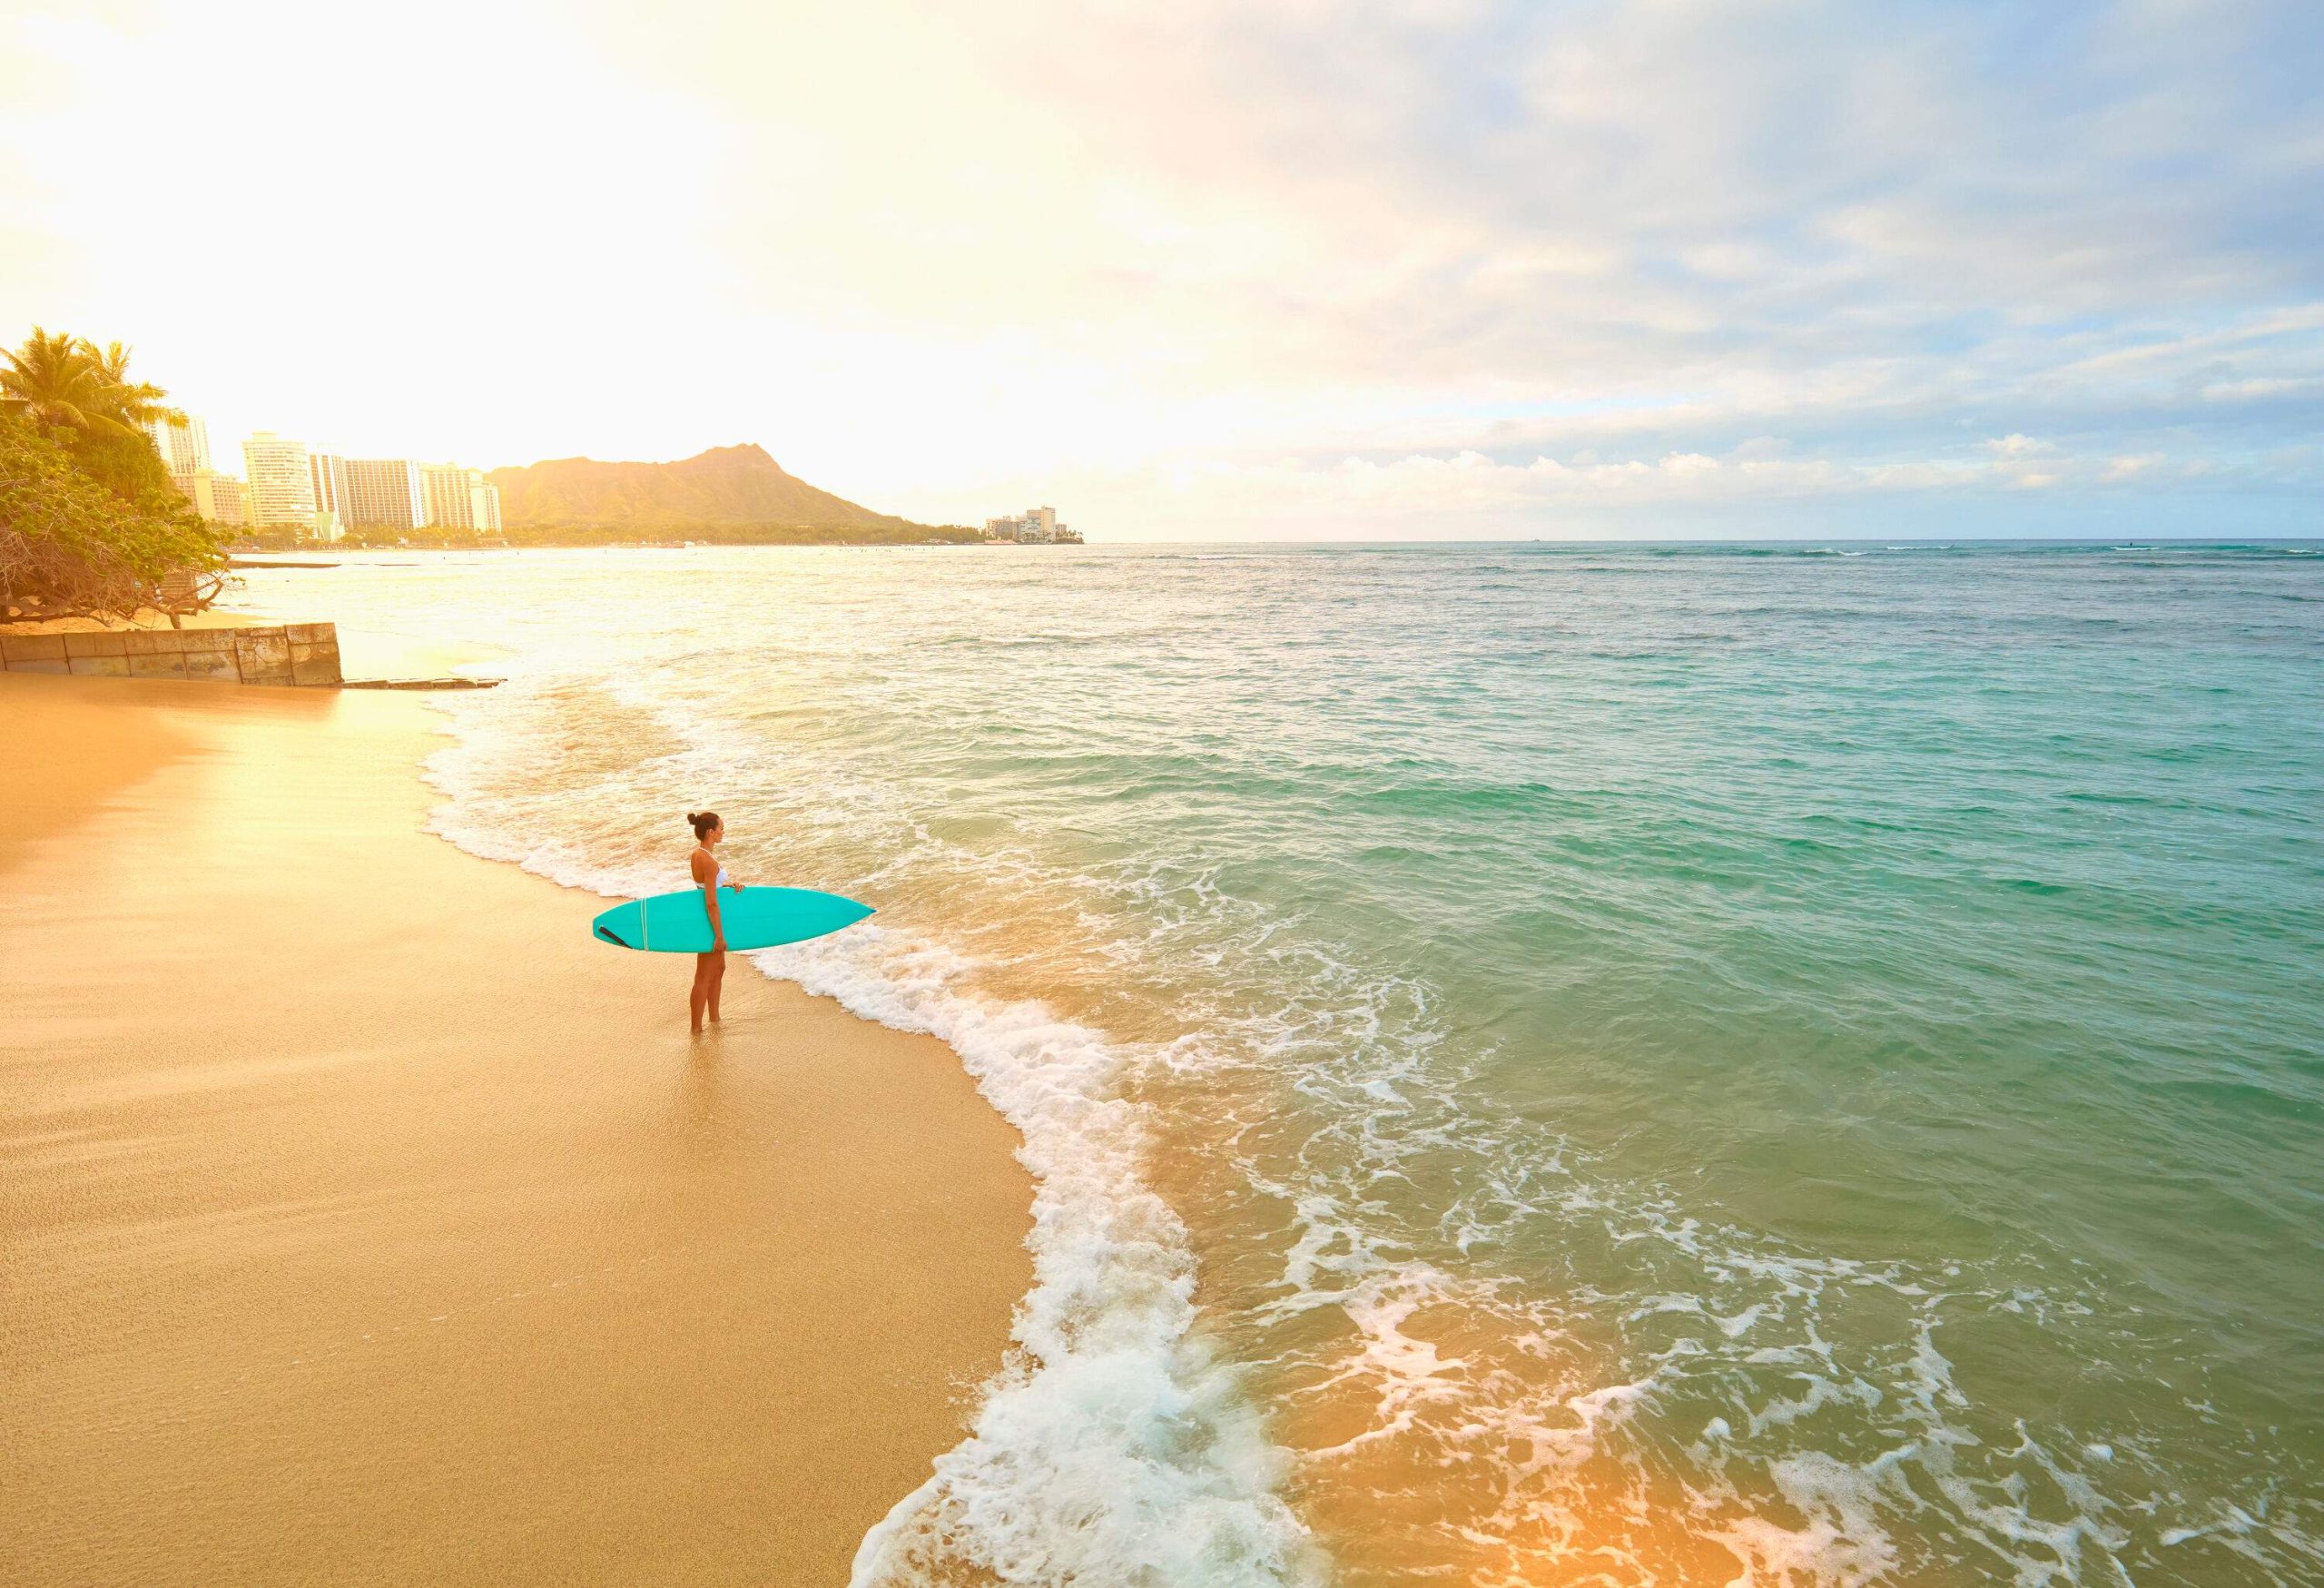 A lone figure carrying a surfboard stands poised on the waves of the beach.